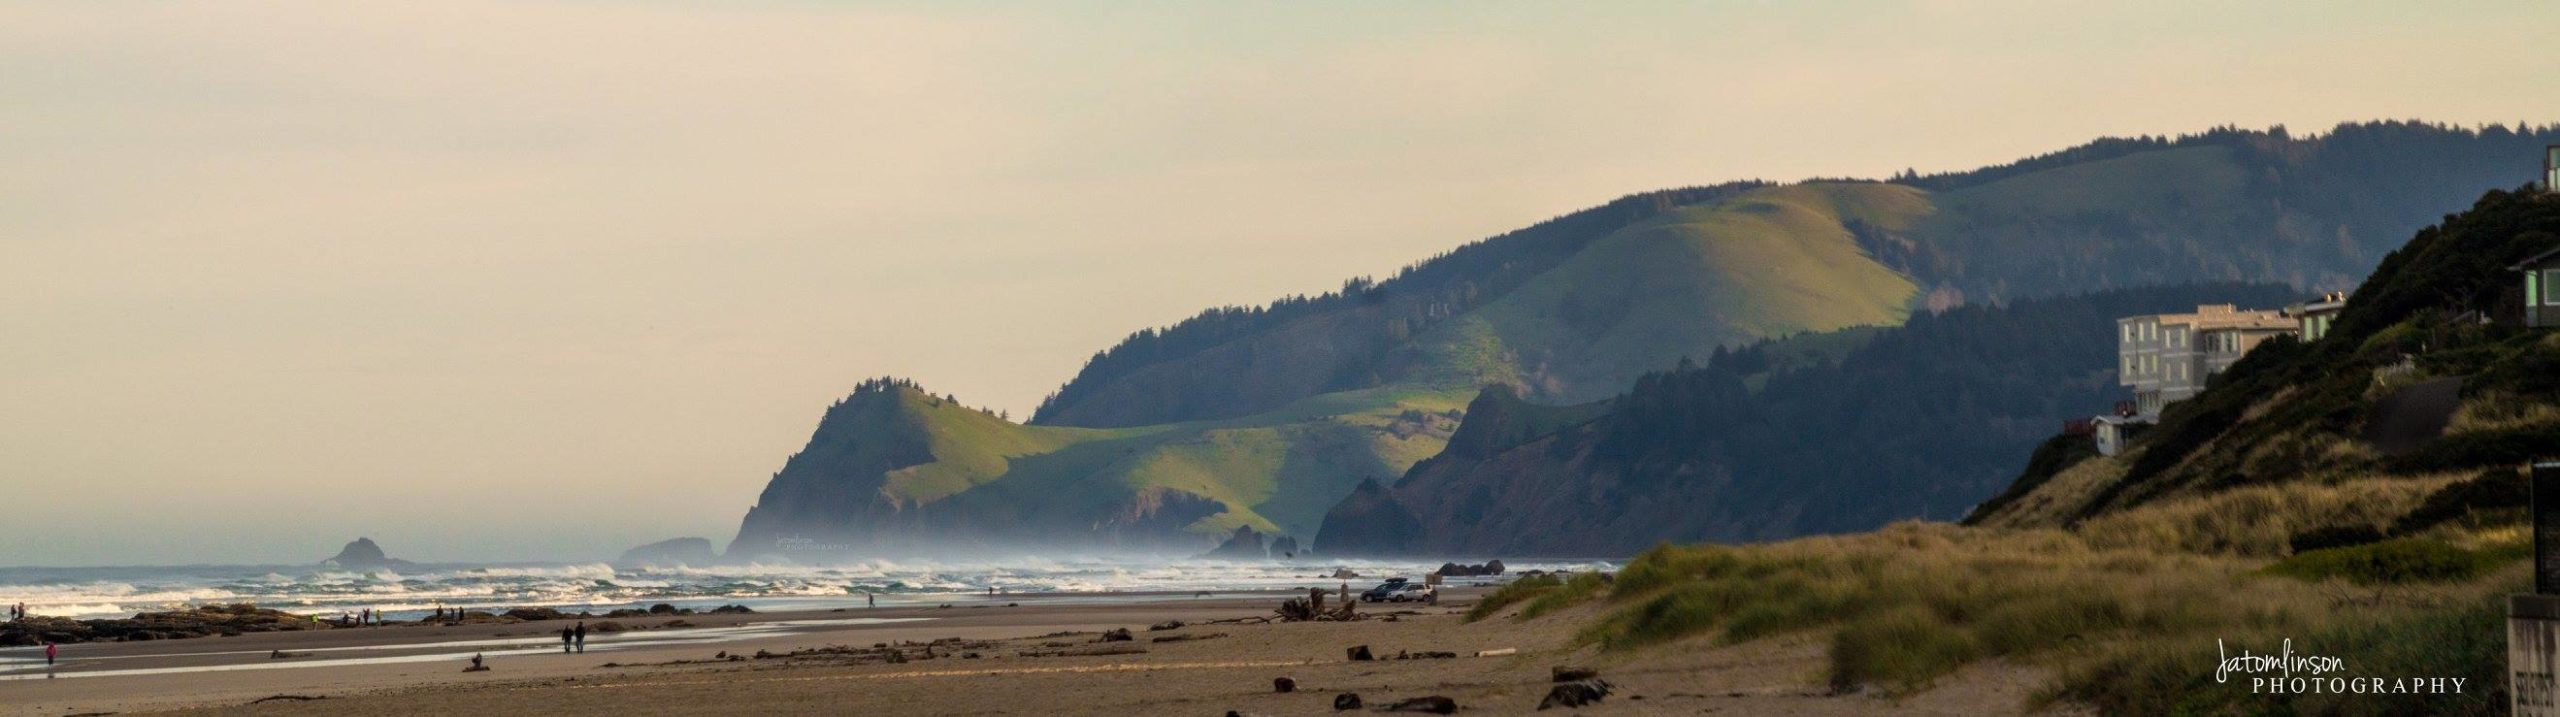 The beach and hills in Lincoln City Oregon.